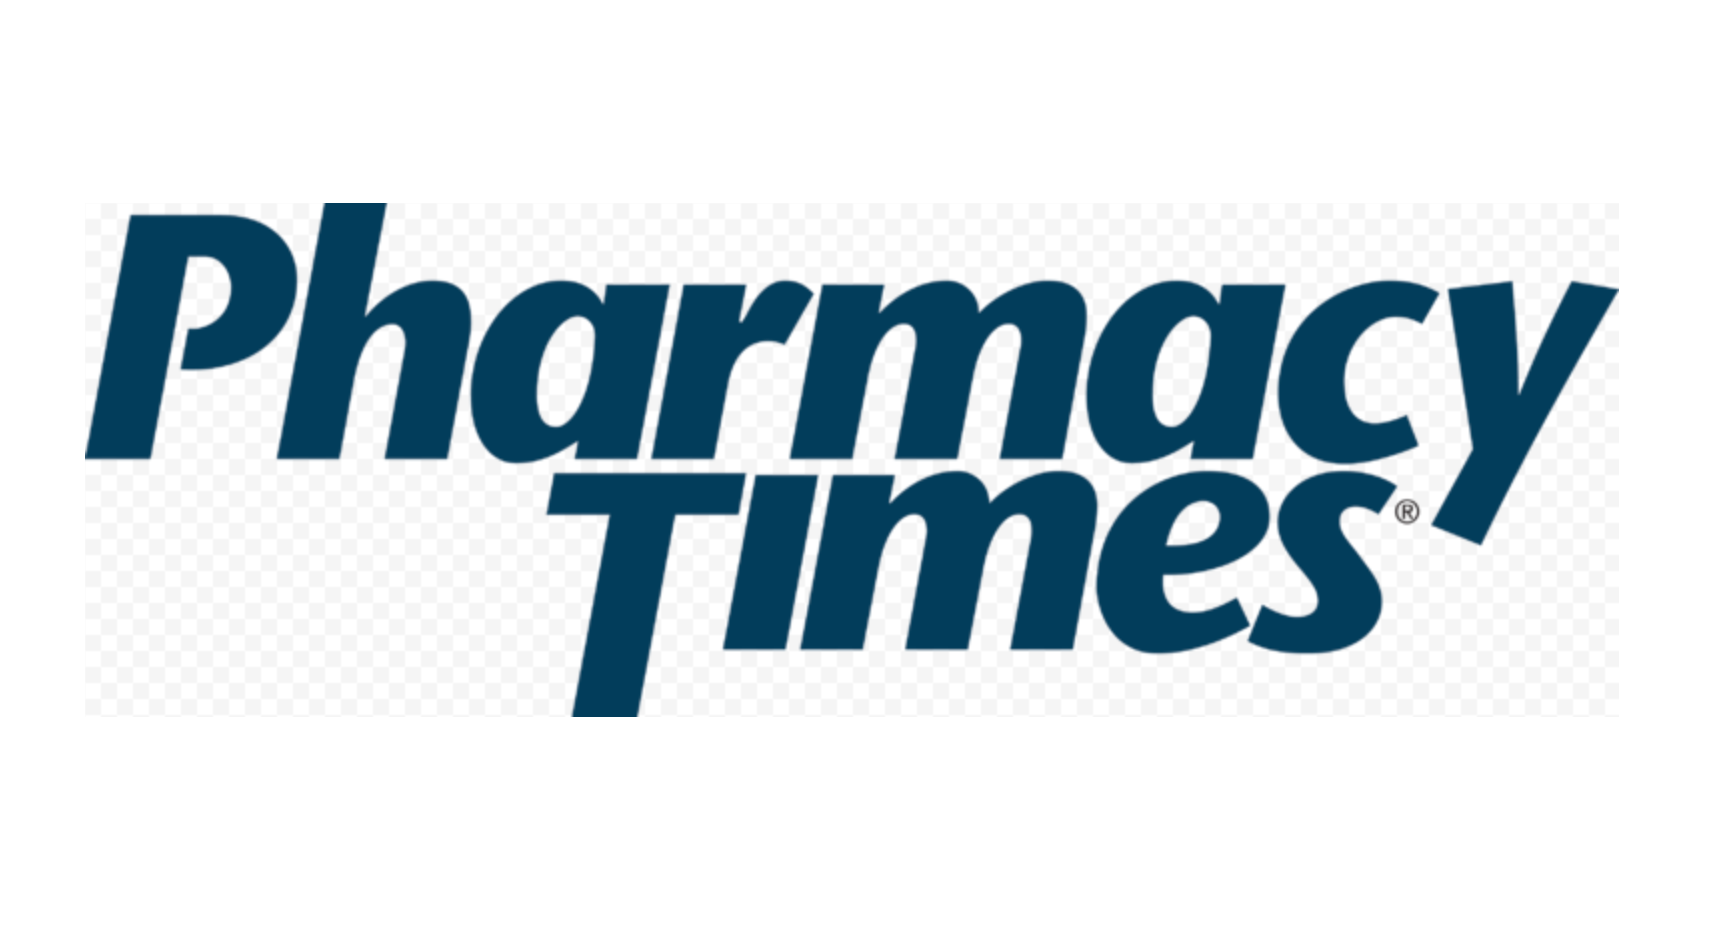 Pharmacy Times Expands Strategic Alliance Partnership Program With the Addition of Six New Health System Partners